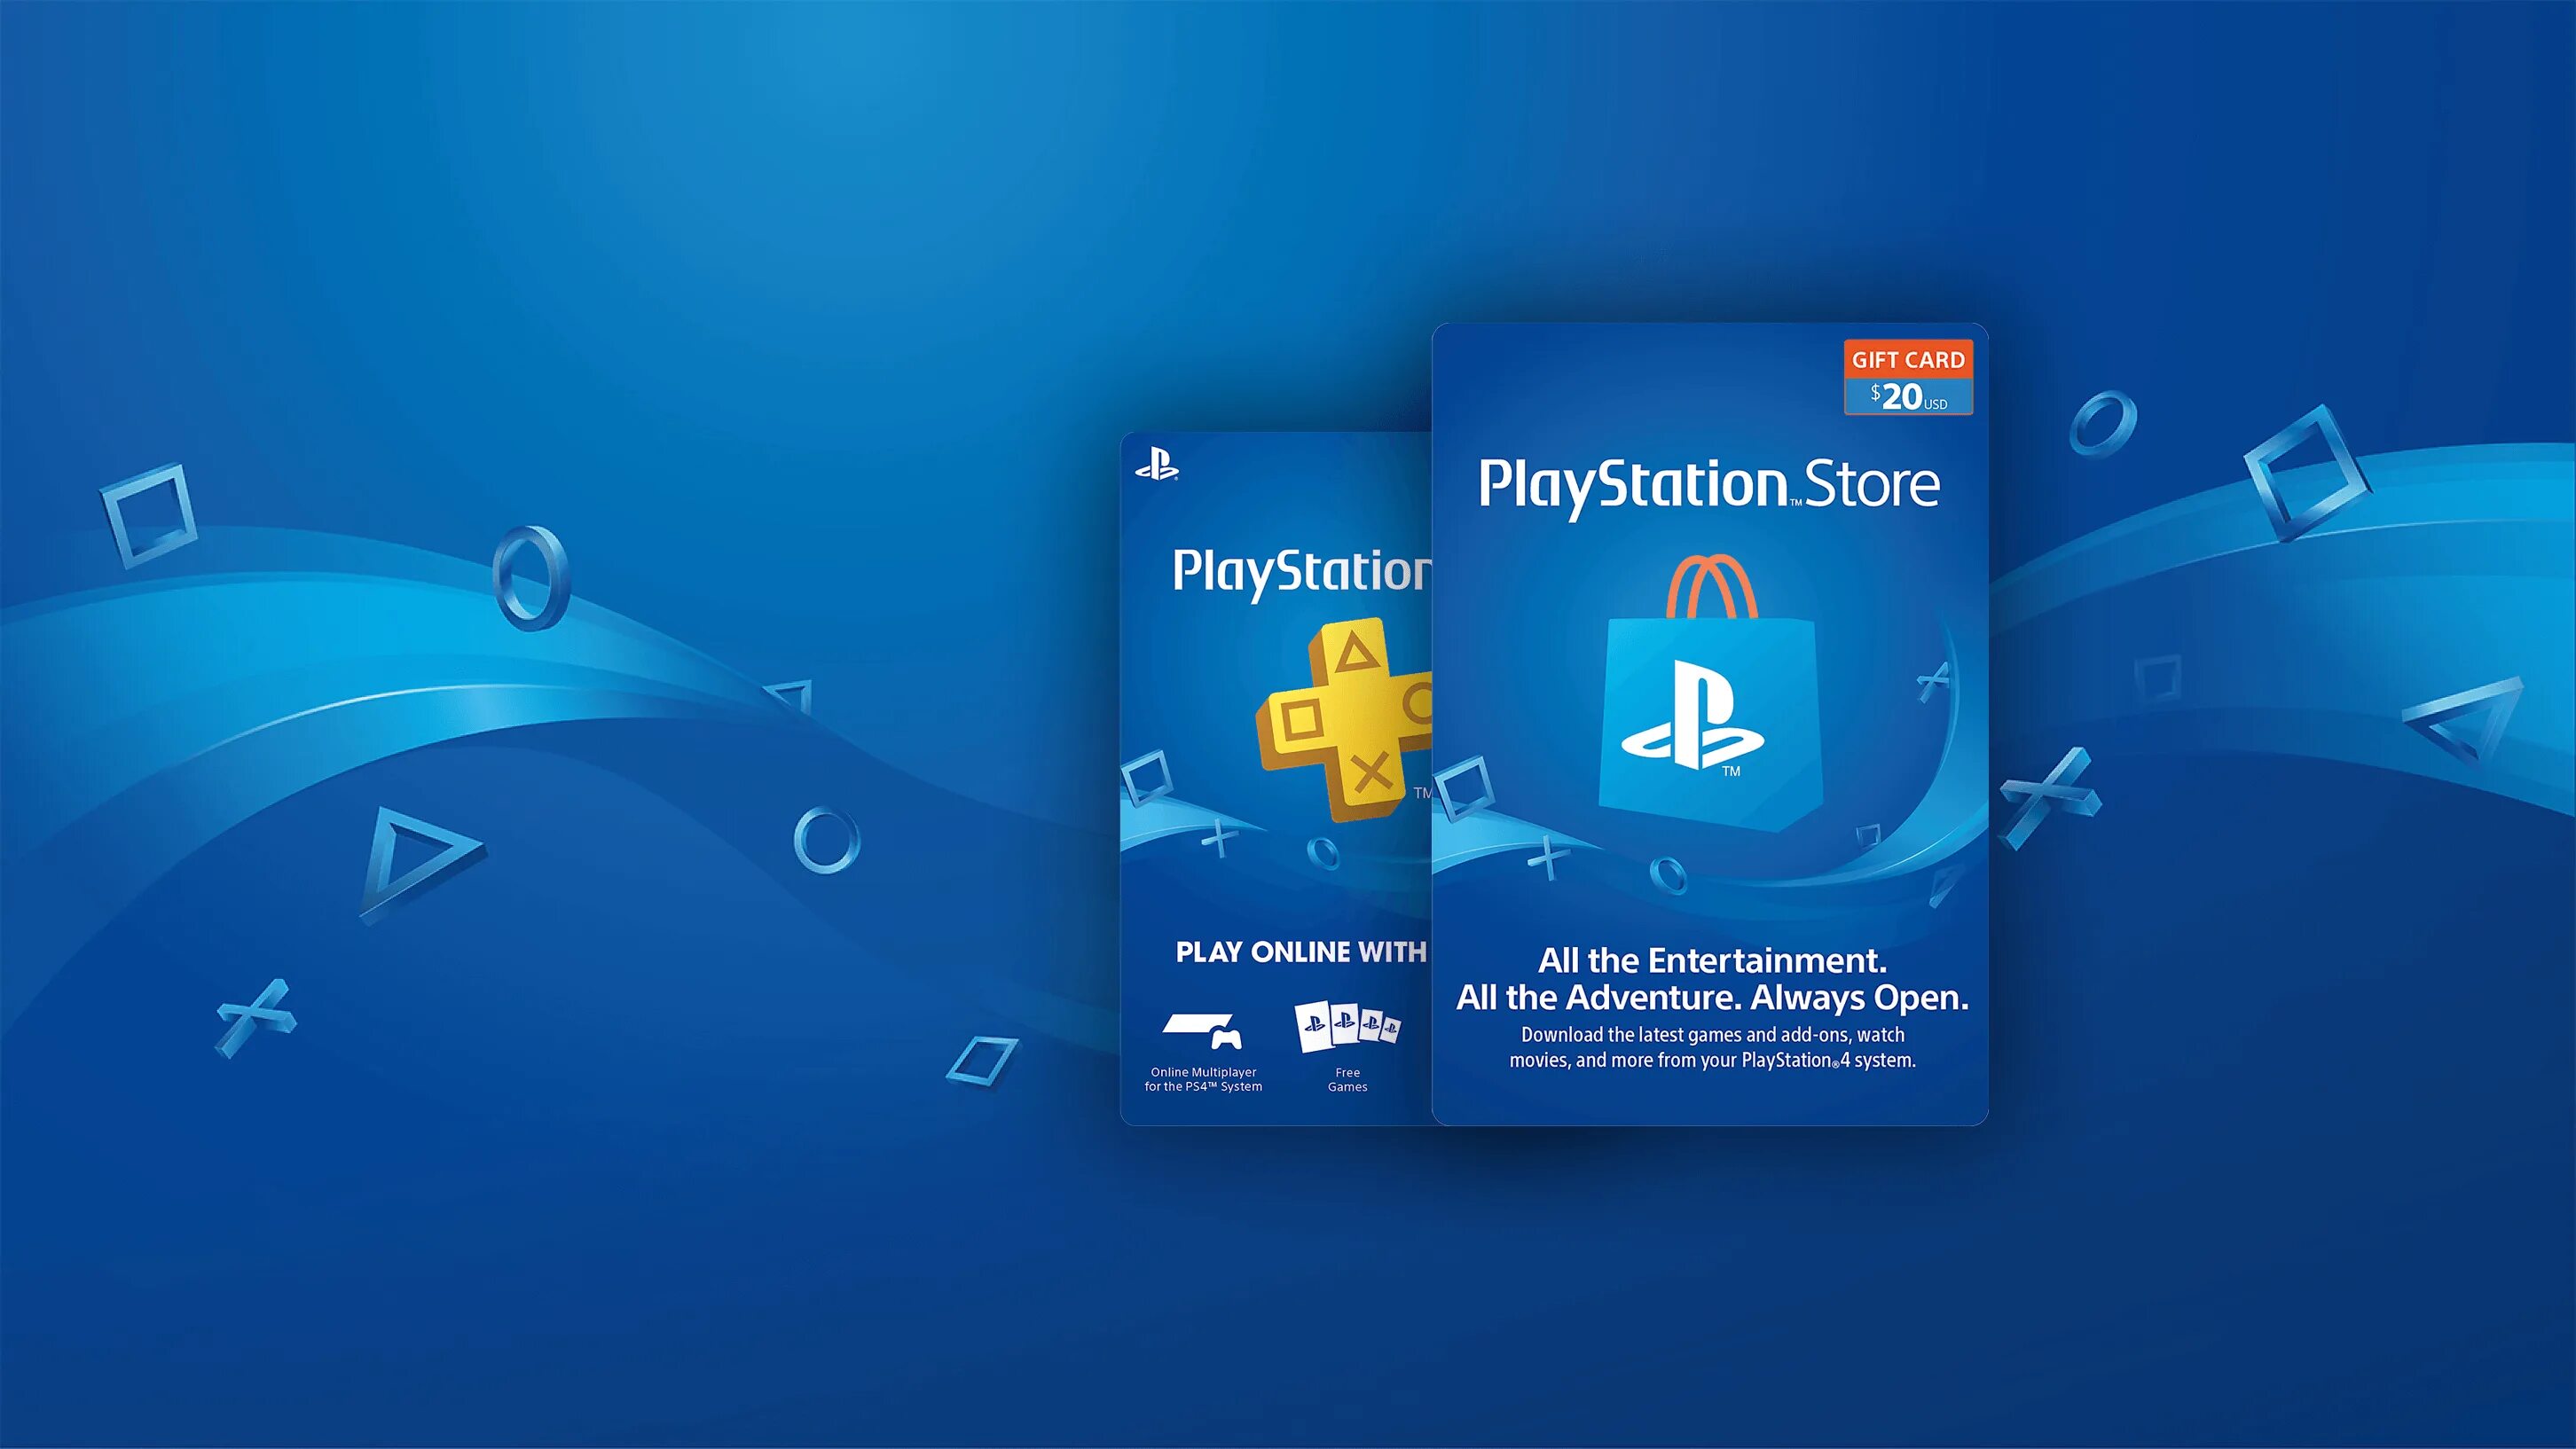 PLAYSTATION Plus Gift Card. PS Sony PLAYSTATION Store. Карта Sony PLAYSTATION Plus Turkey. Sony PLAYSTATION Store Турция.